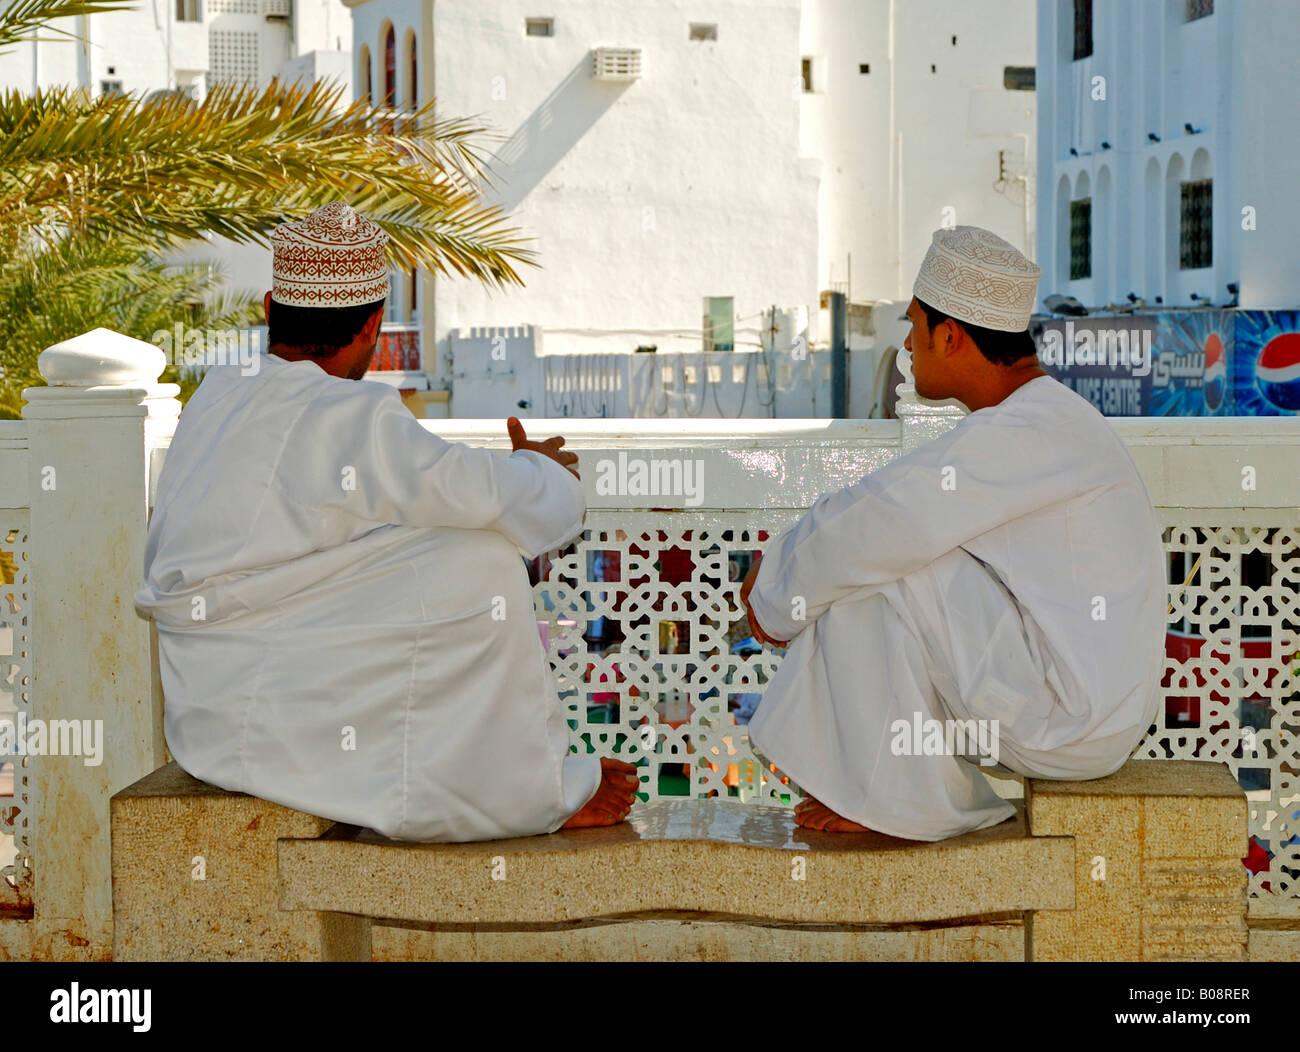 Two Omani men wearing traditional dishdashi or thawb clothing, robes, Muscat, Oman, Middle East Stock Photo